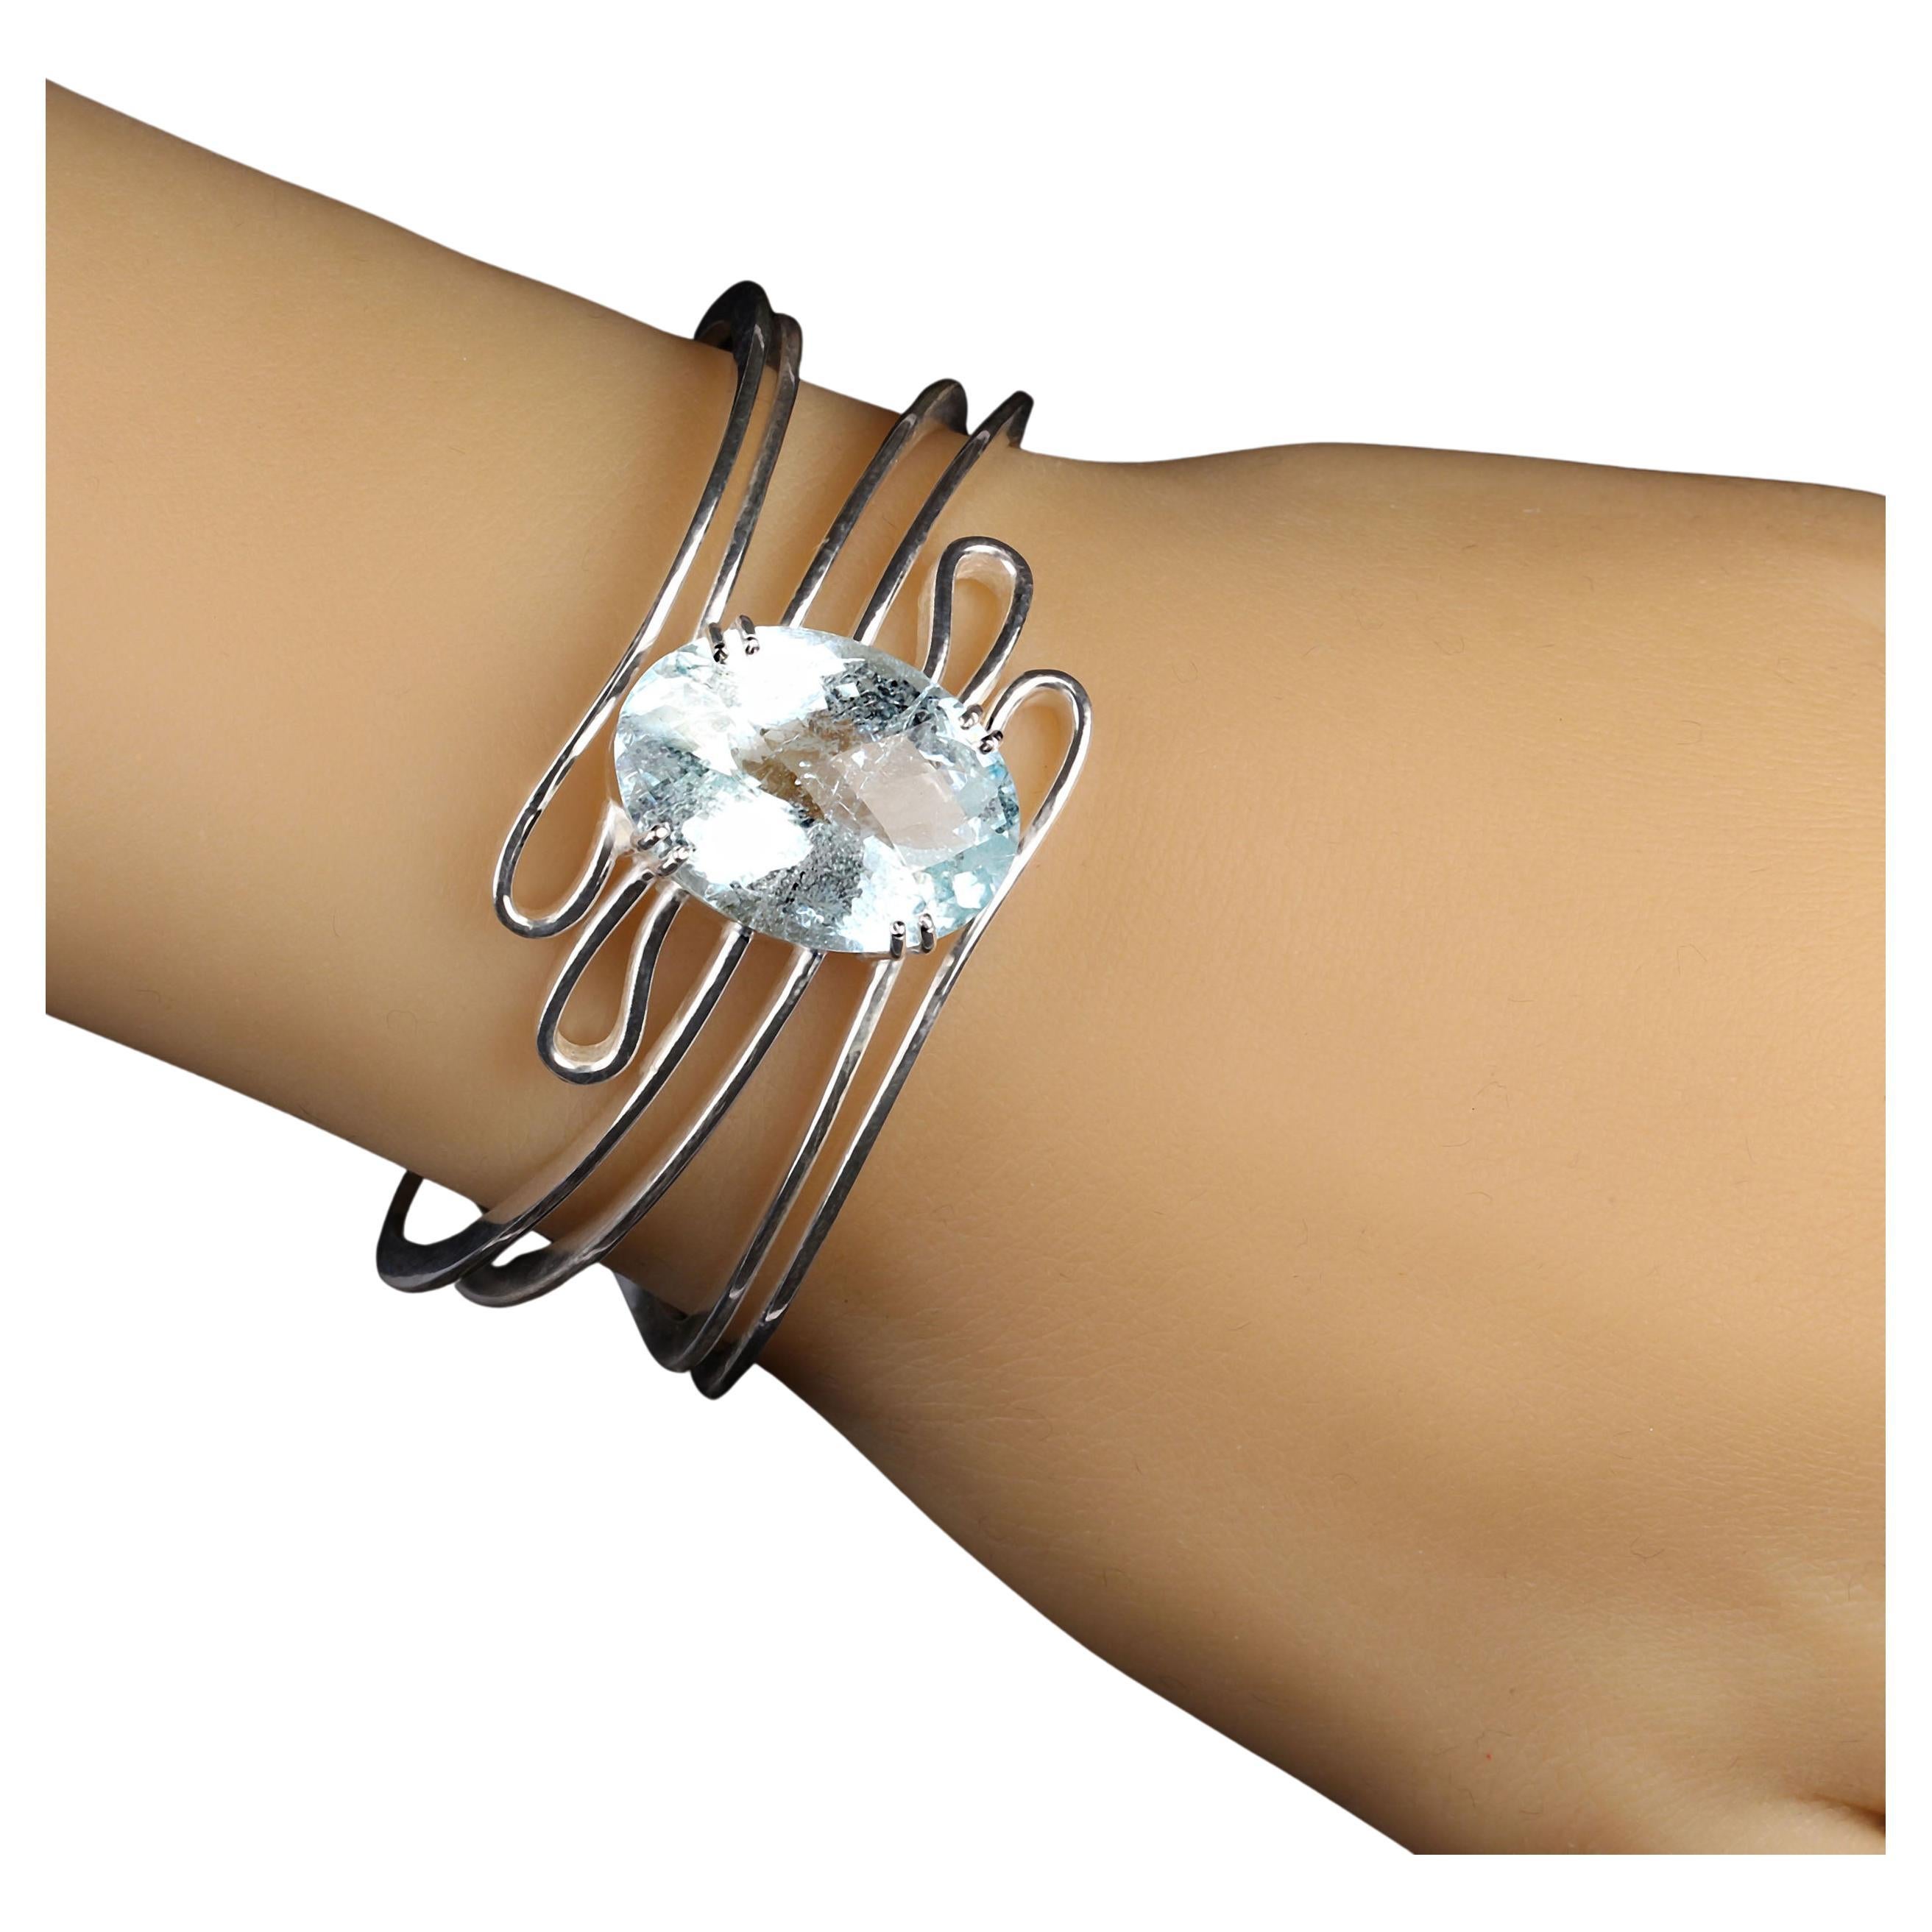 Magnificent 25 carat oval Aquamarine with checkerboard table sits in the middle of swirles of sterling silver.  This cuff bracelet is enchanting. You will love wearing it.  MB2302